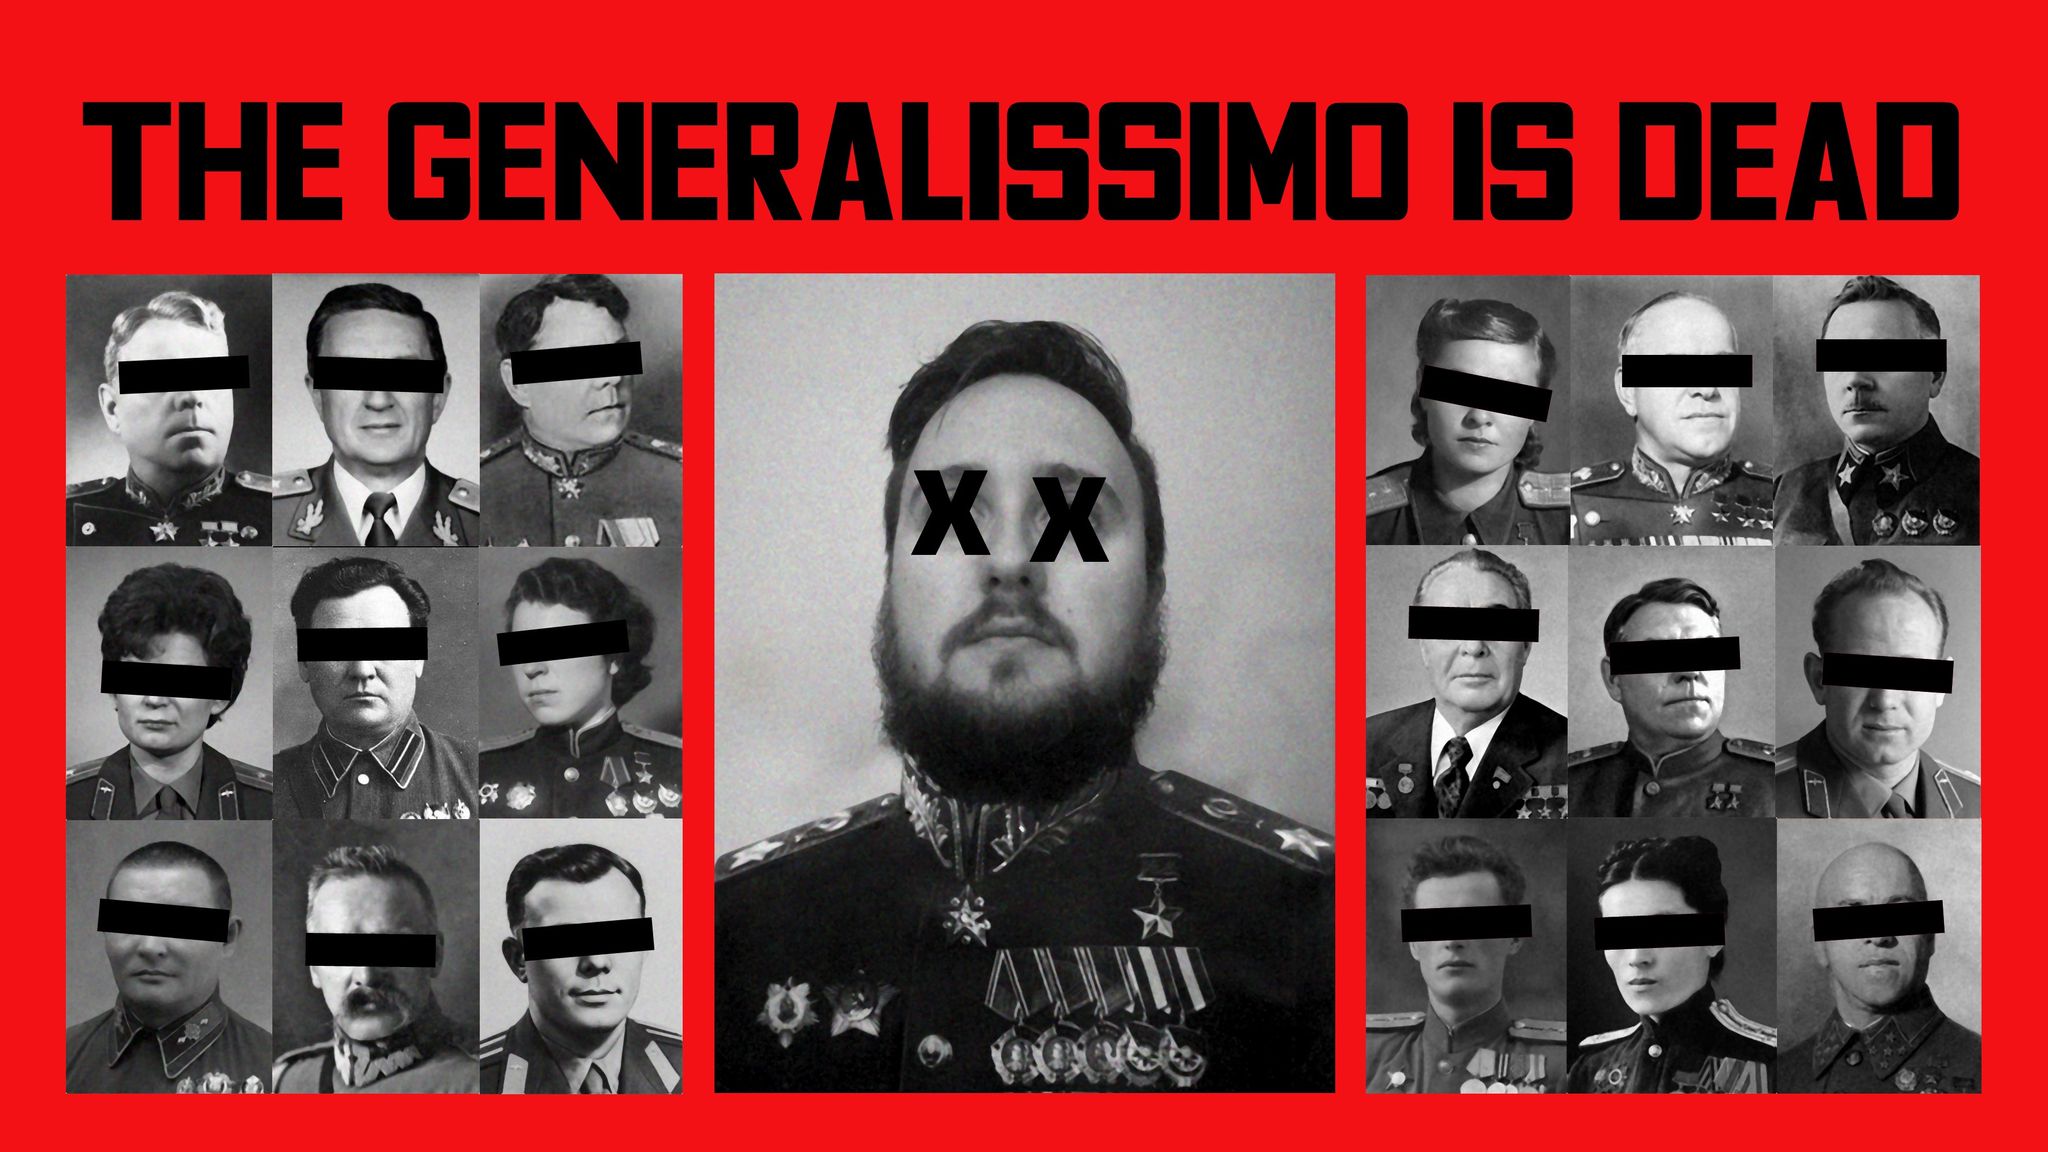 The Generalissimo is Dead